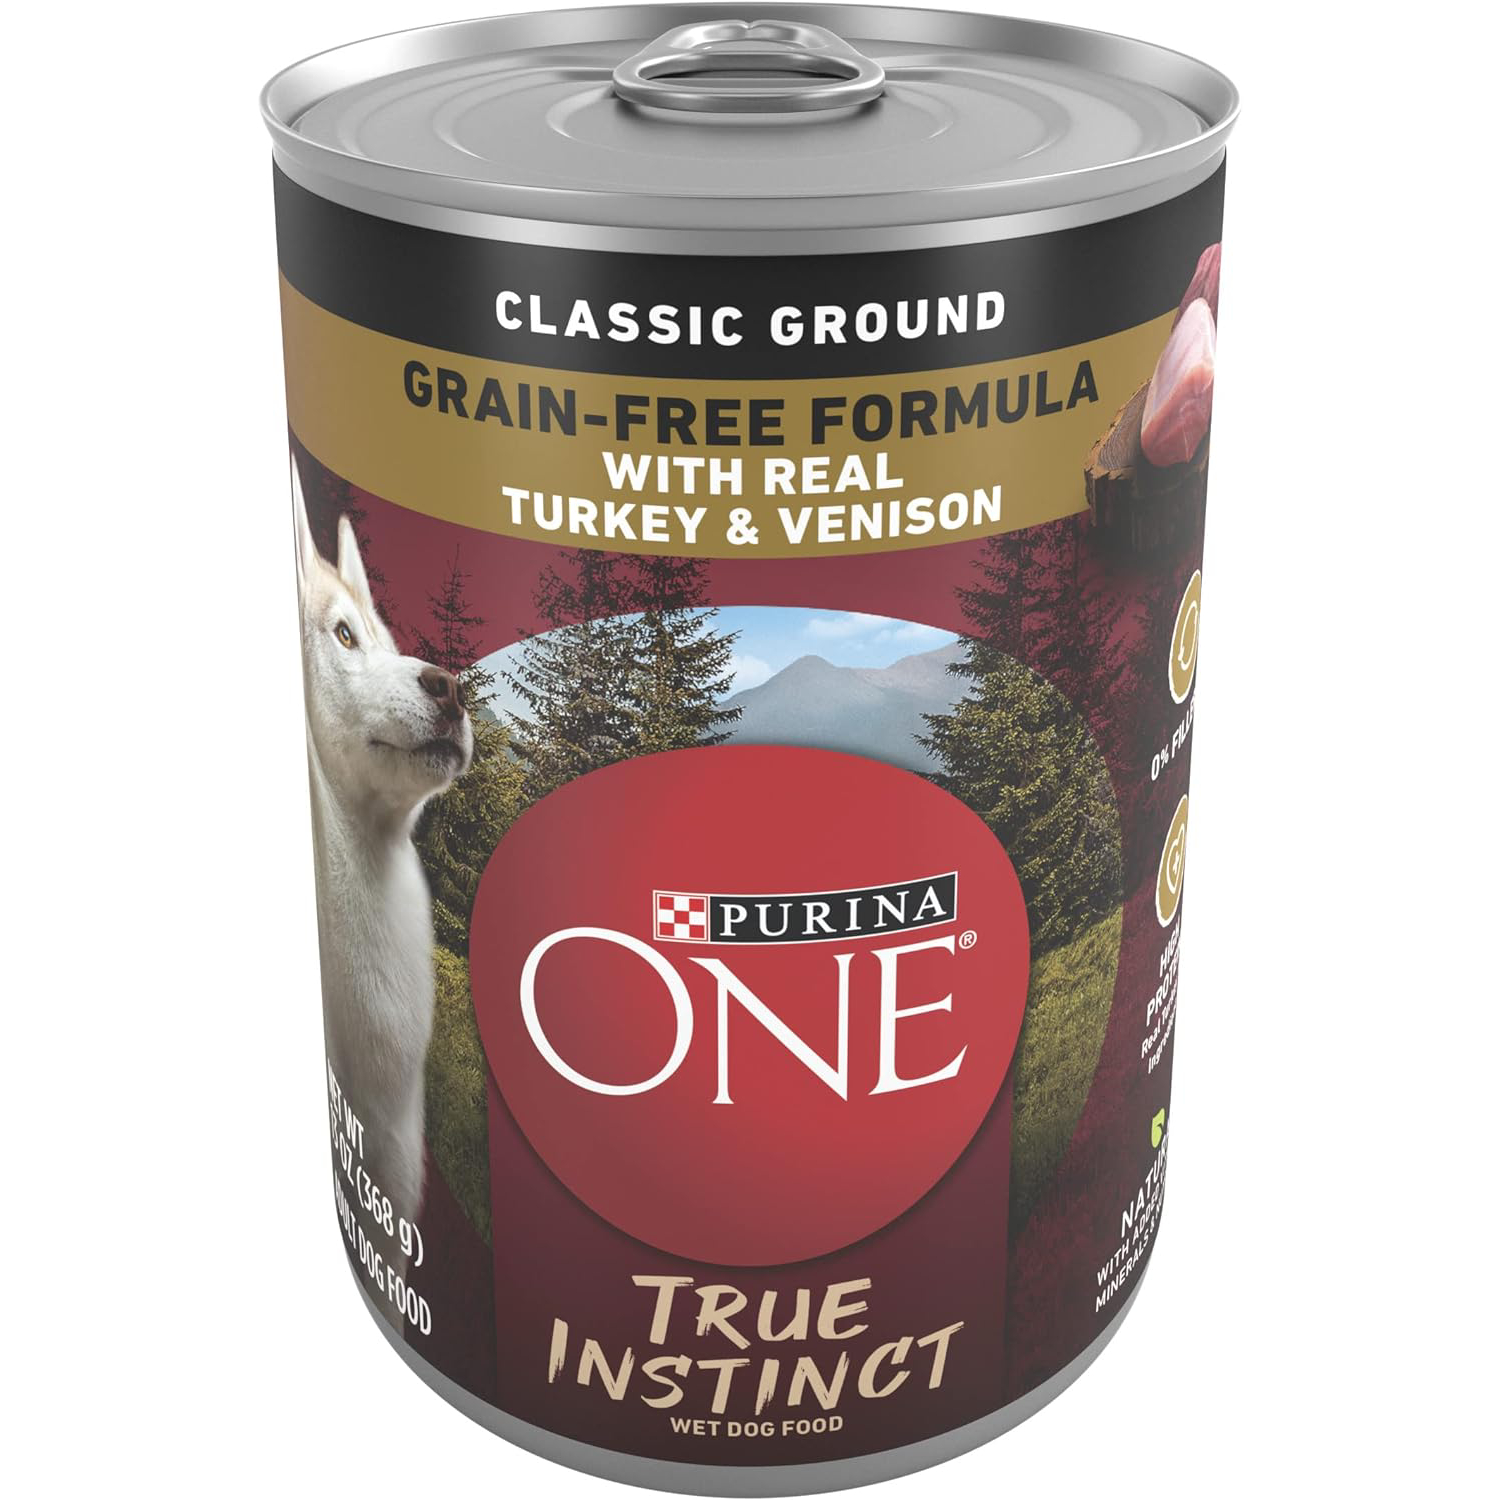 New Project Purina ONE Wet Dog Food True Instinct Classic Ground Grain-Free Formula With Real Turkey And Venison High Protein Wet Dog Food 